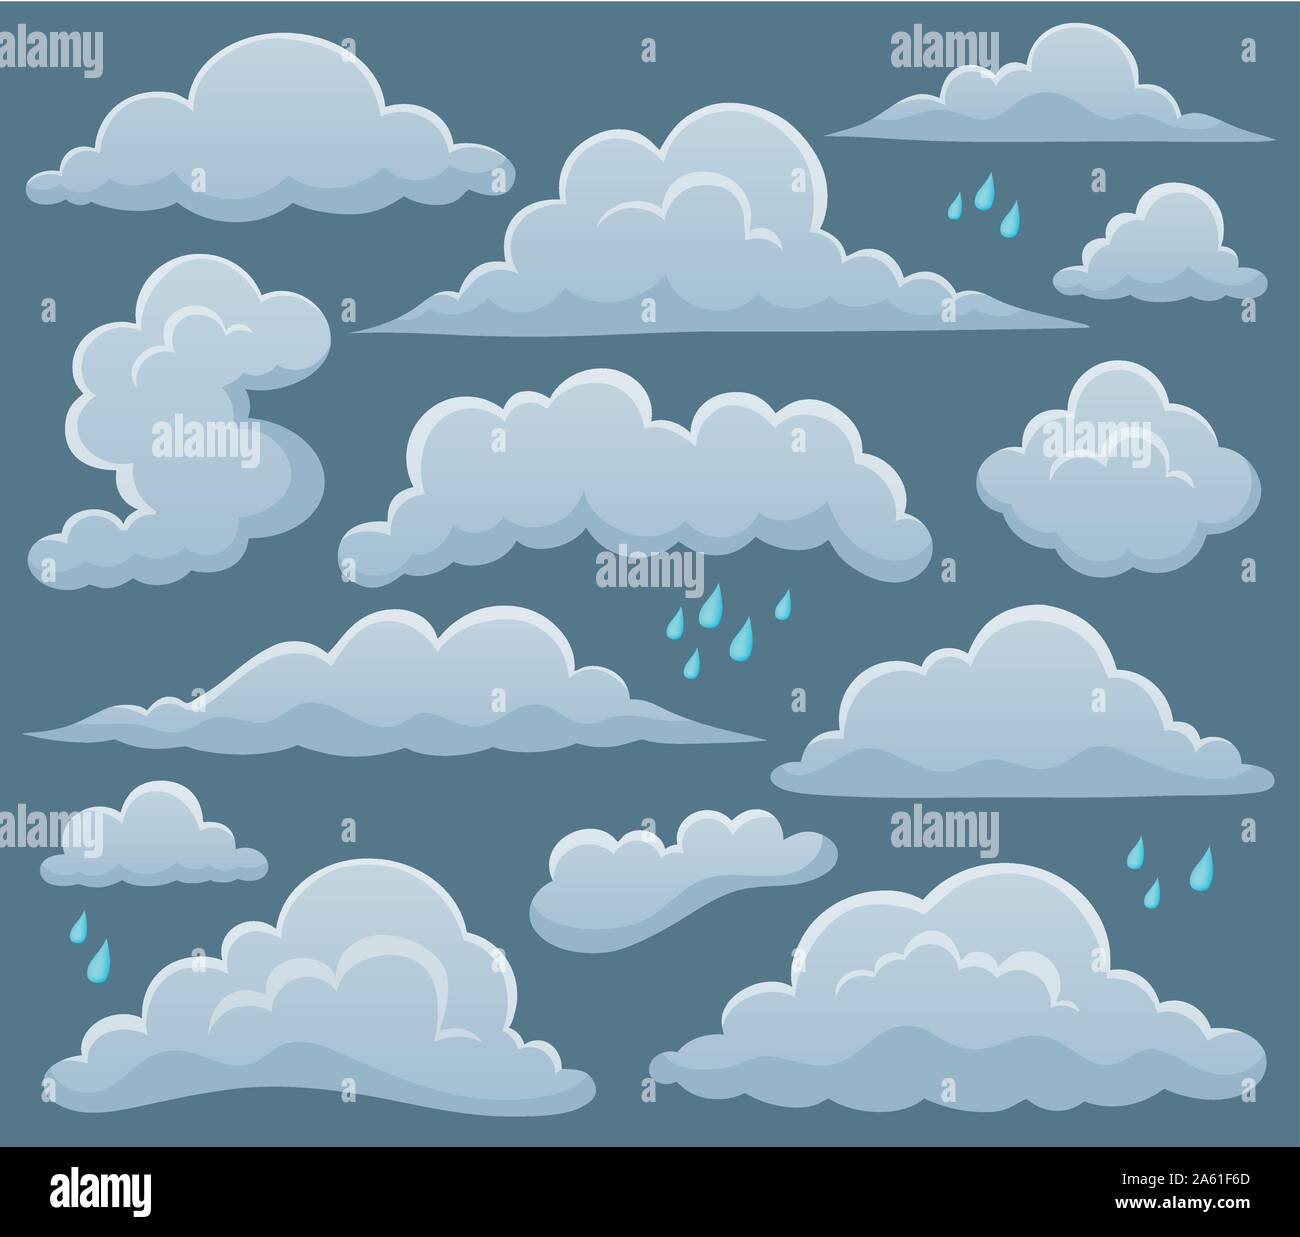 Clouds topic image 3 - eps10 vector illustration. Stock Vector